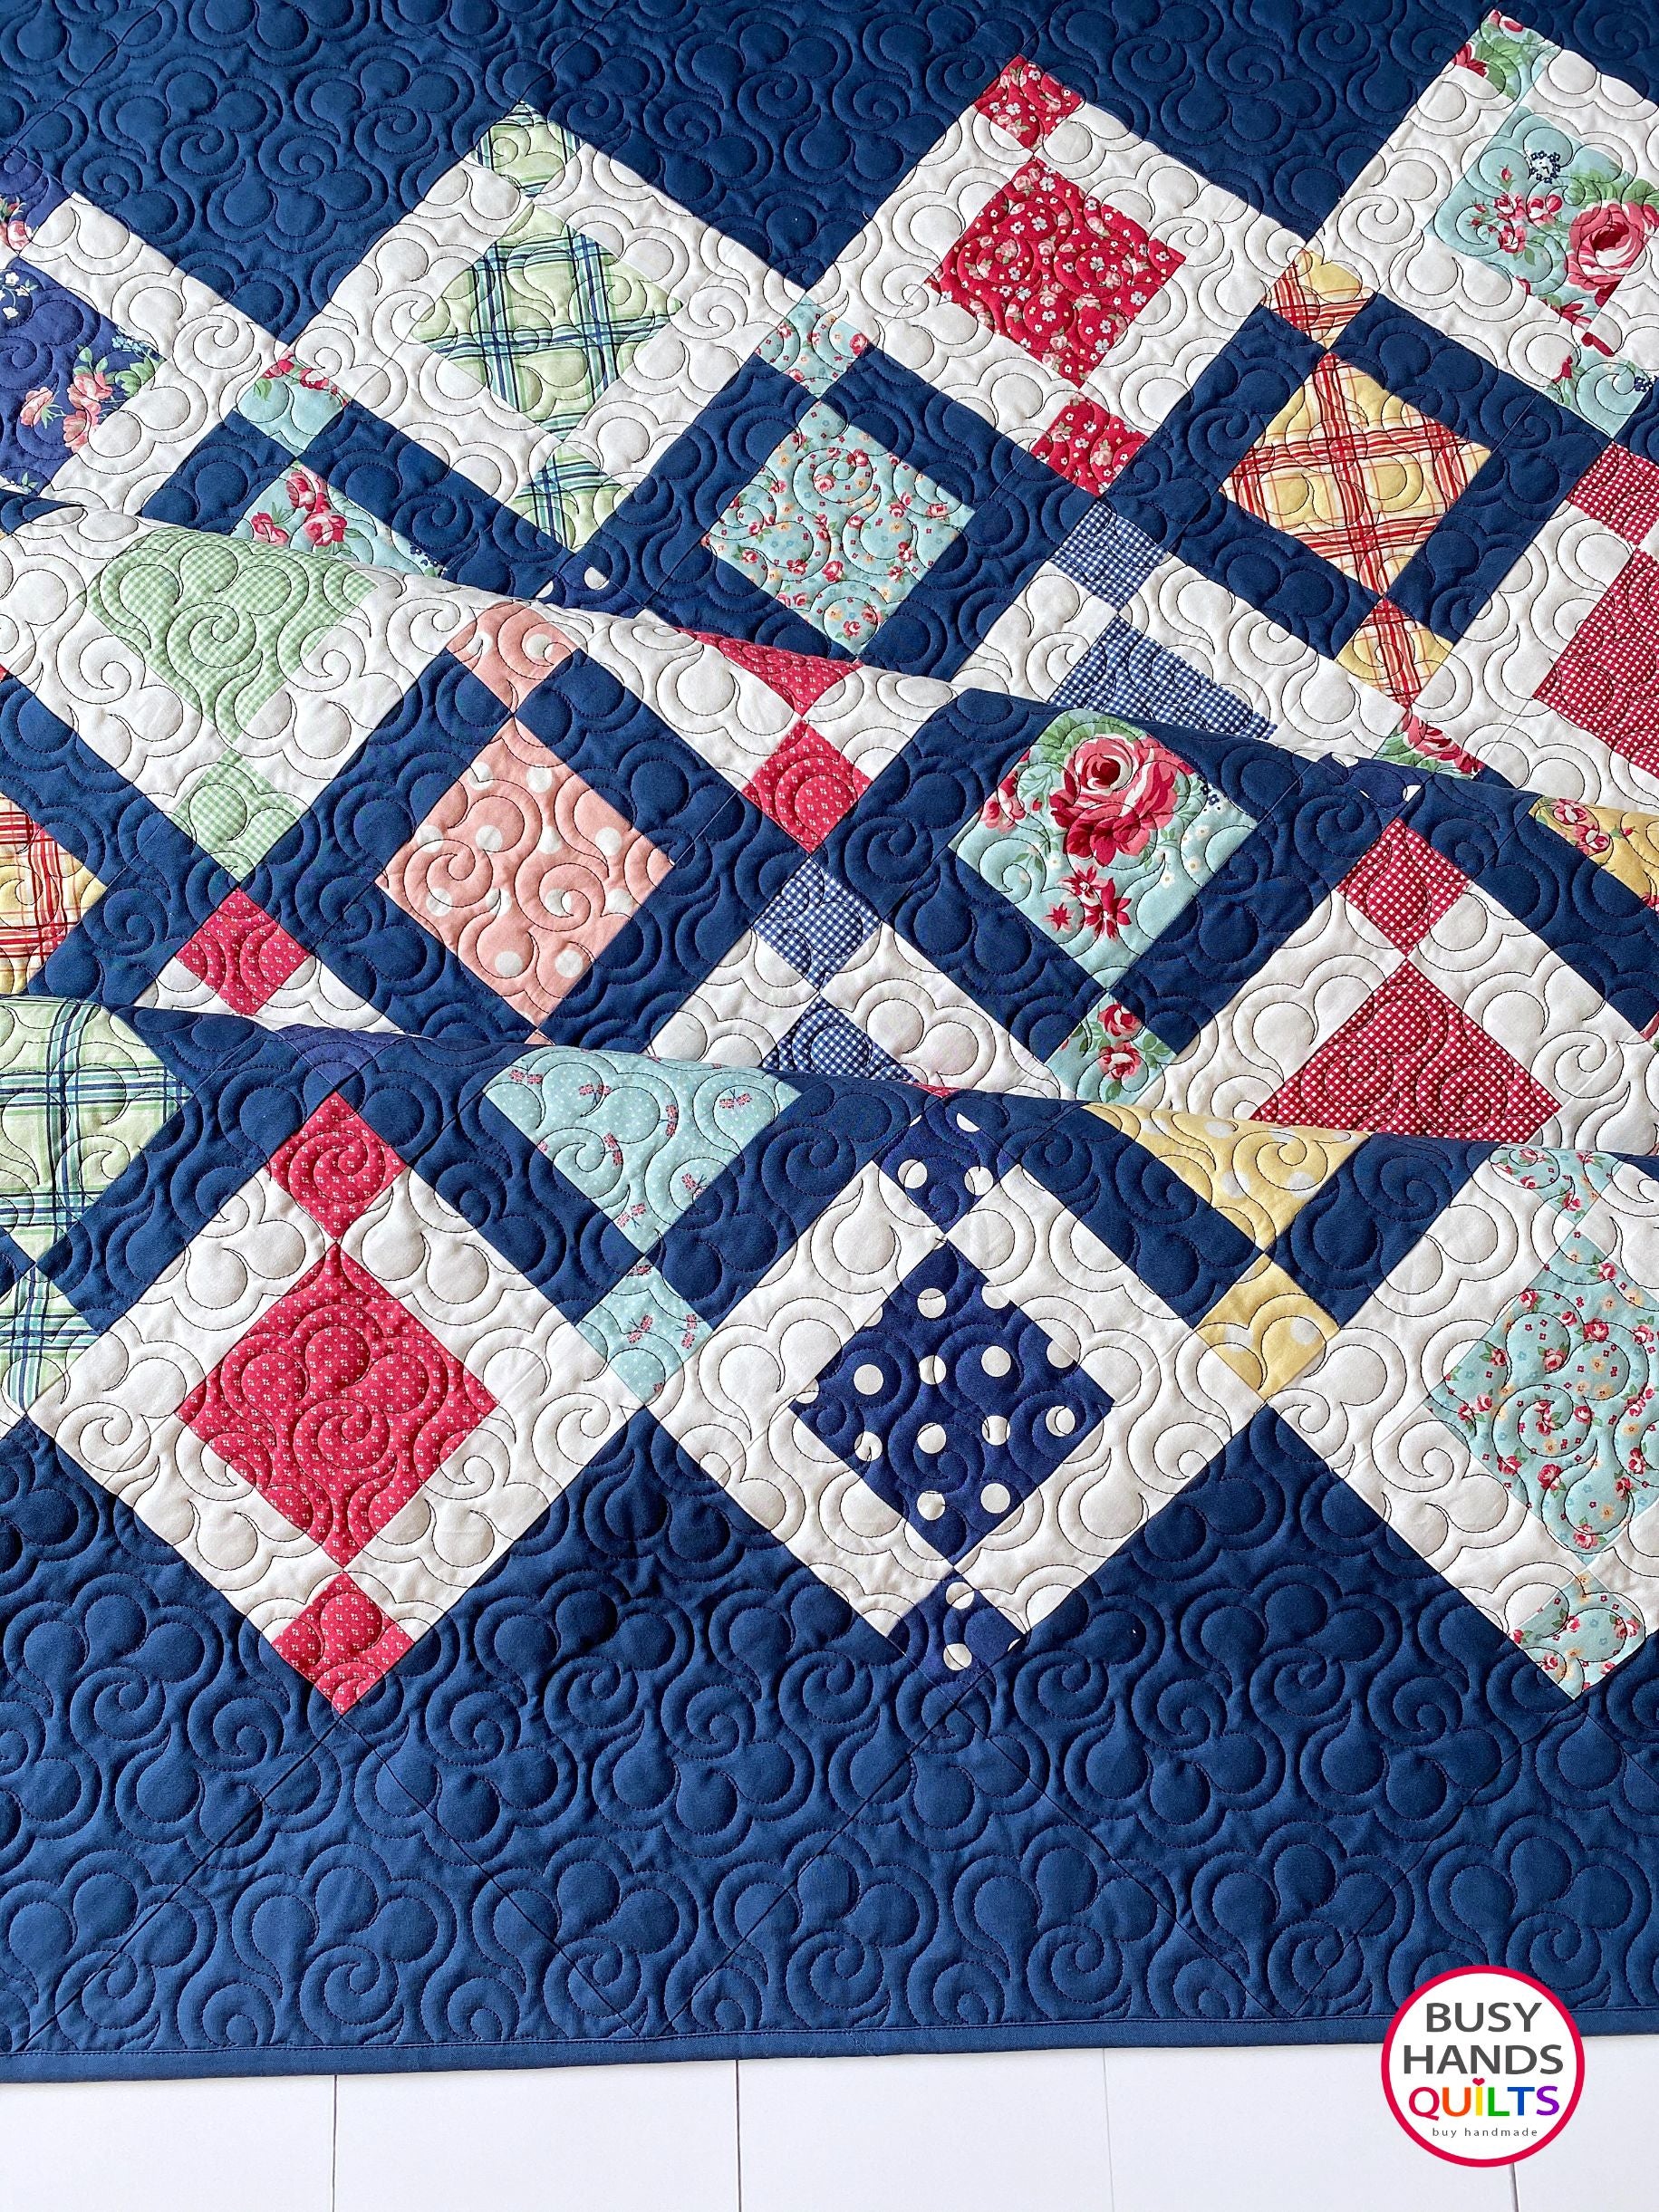 Woven Windows Quilt Pattern PRINTED Busy Hands Quilts {$price}